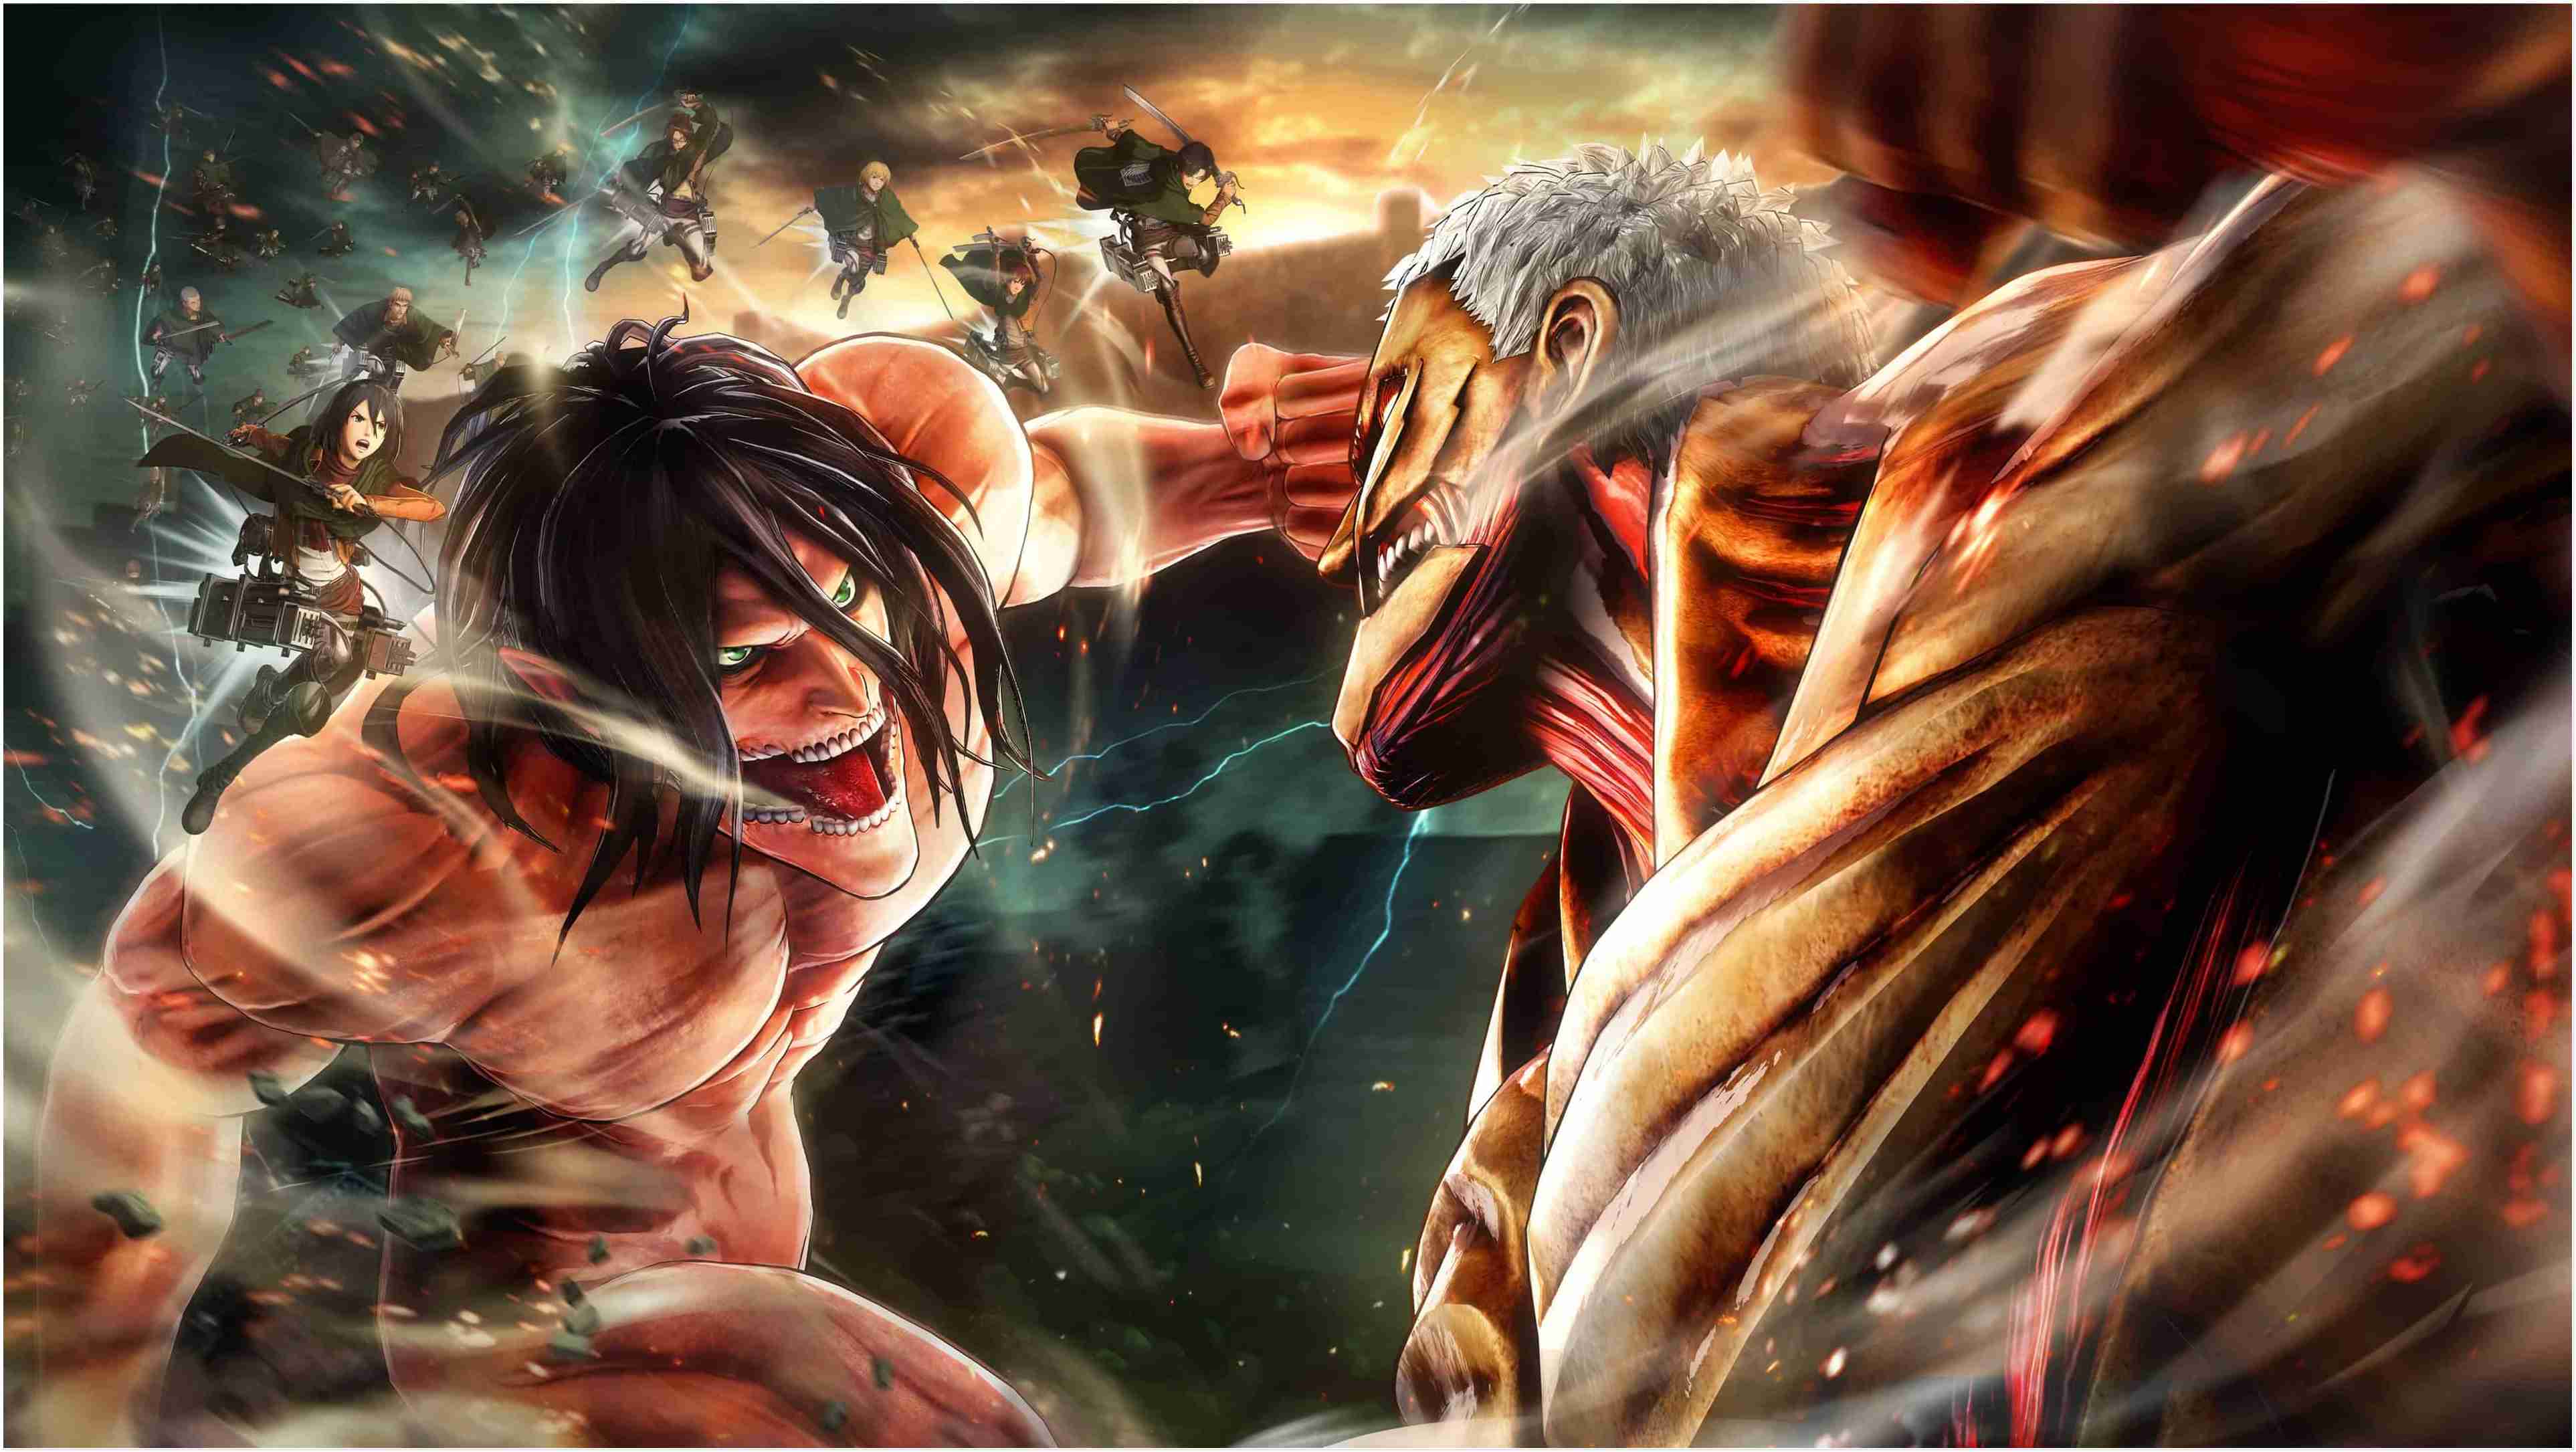 Most popular 17 attack on titan wallpaper latest Update Wallpaper Wise